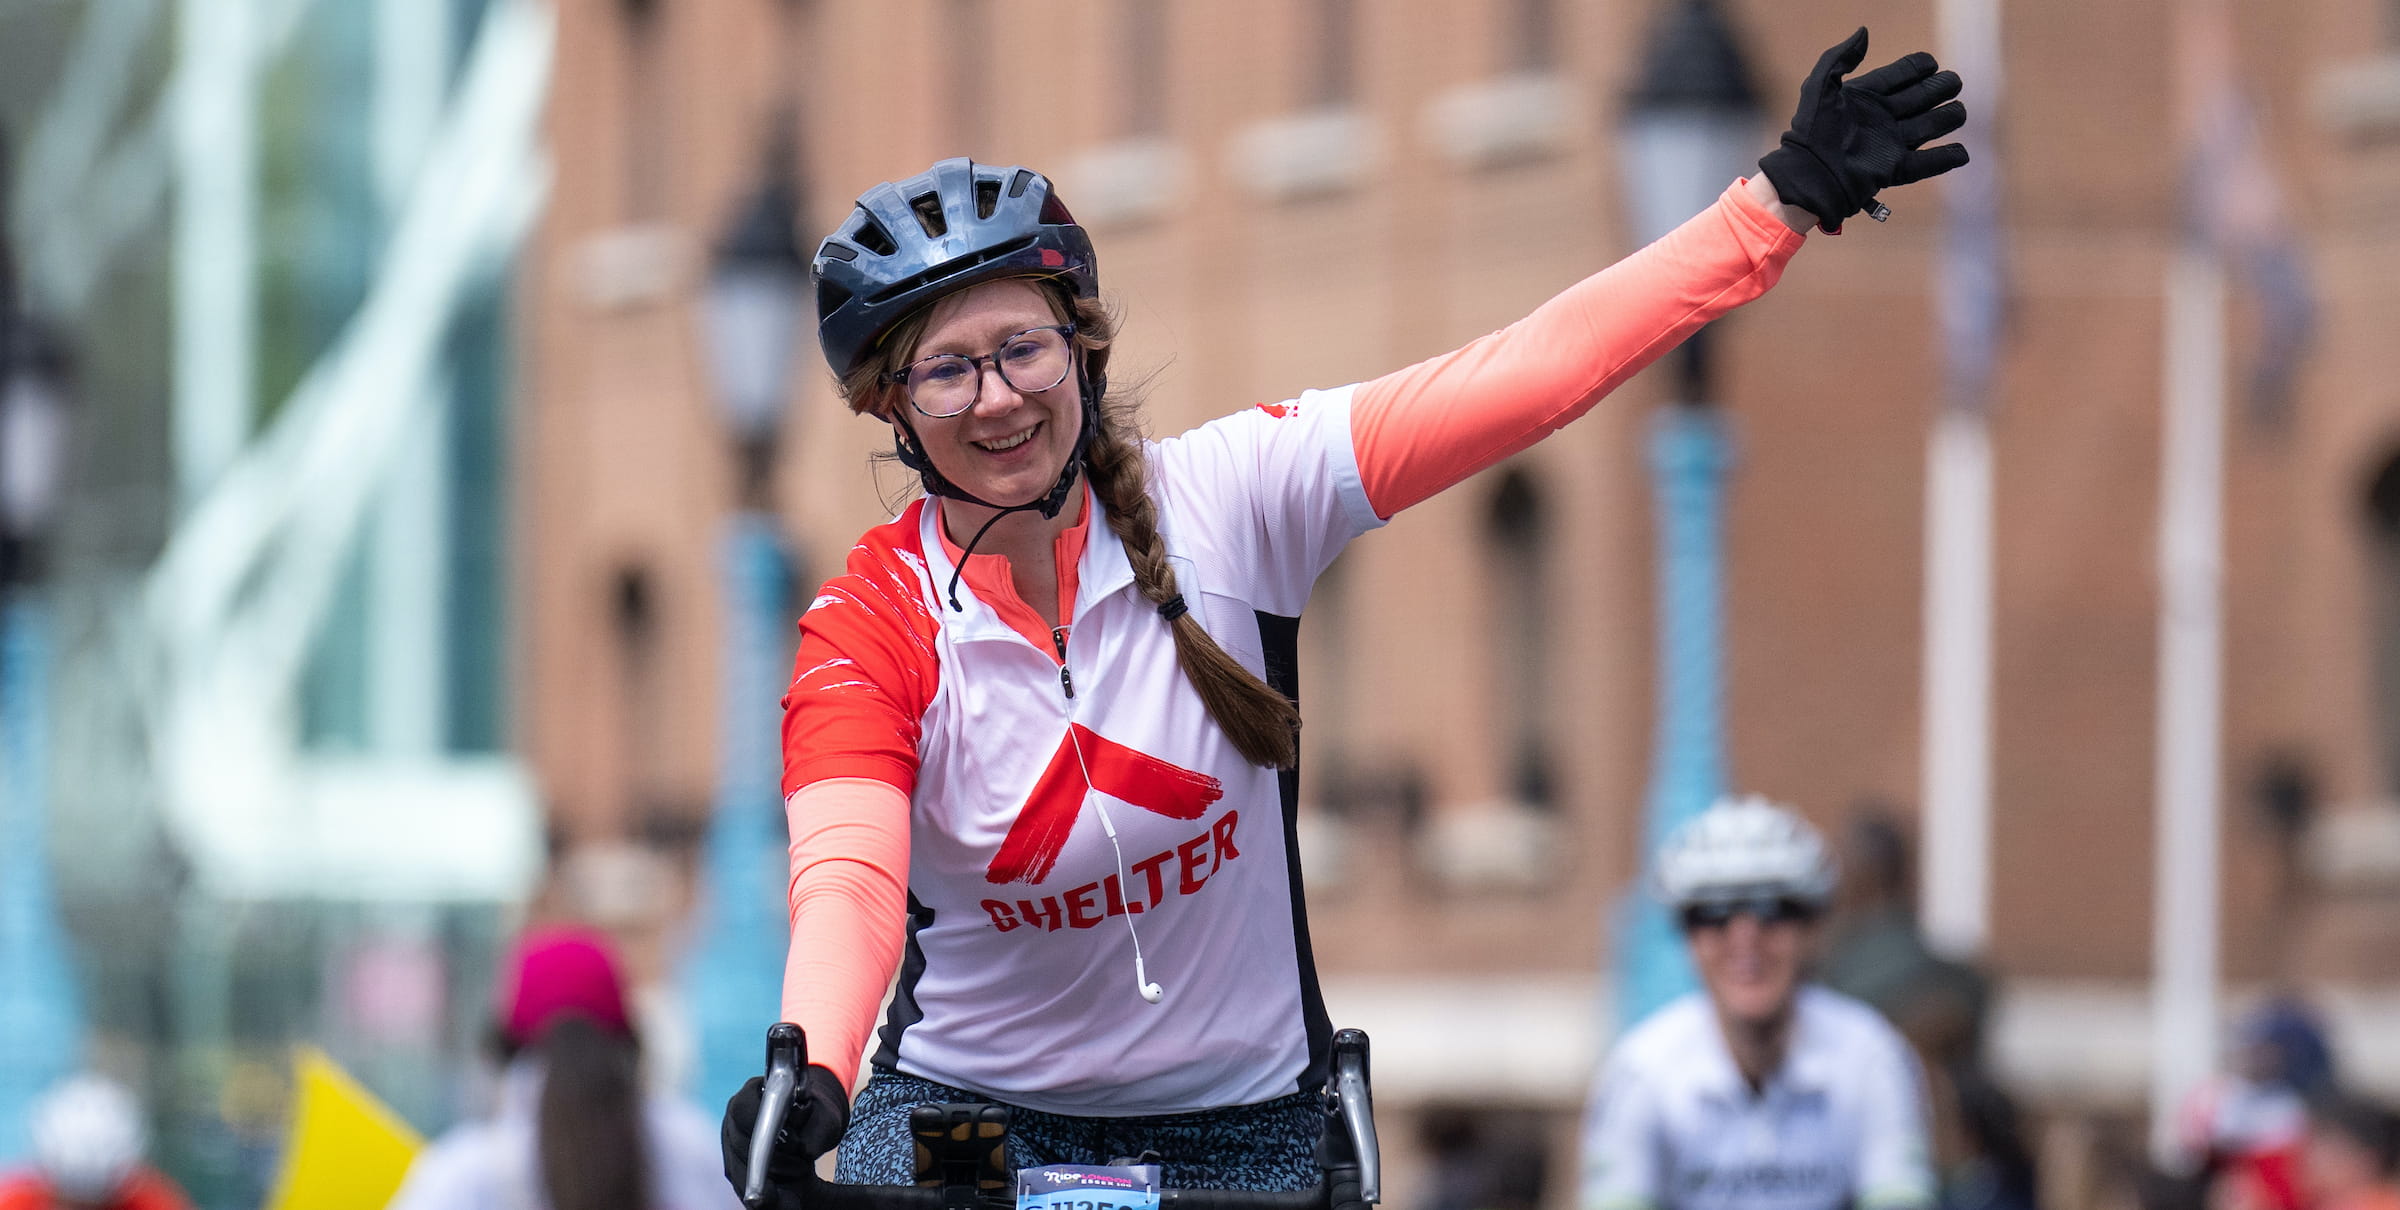 A waving participant in the RideLondon sportive